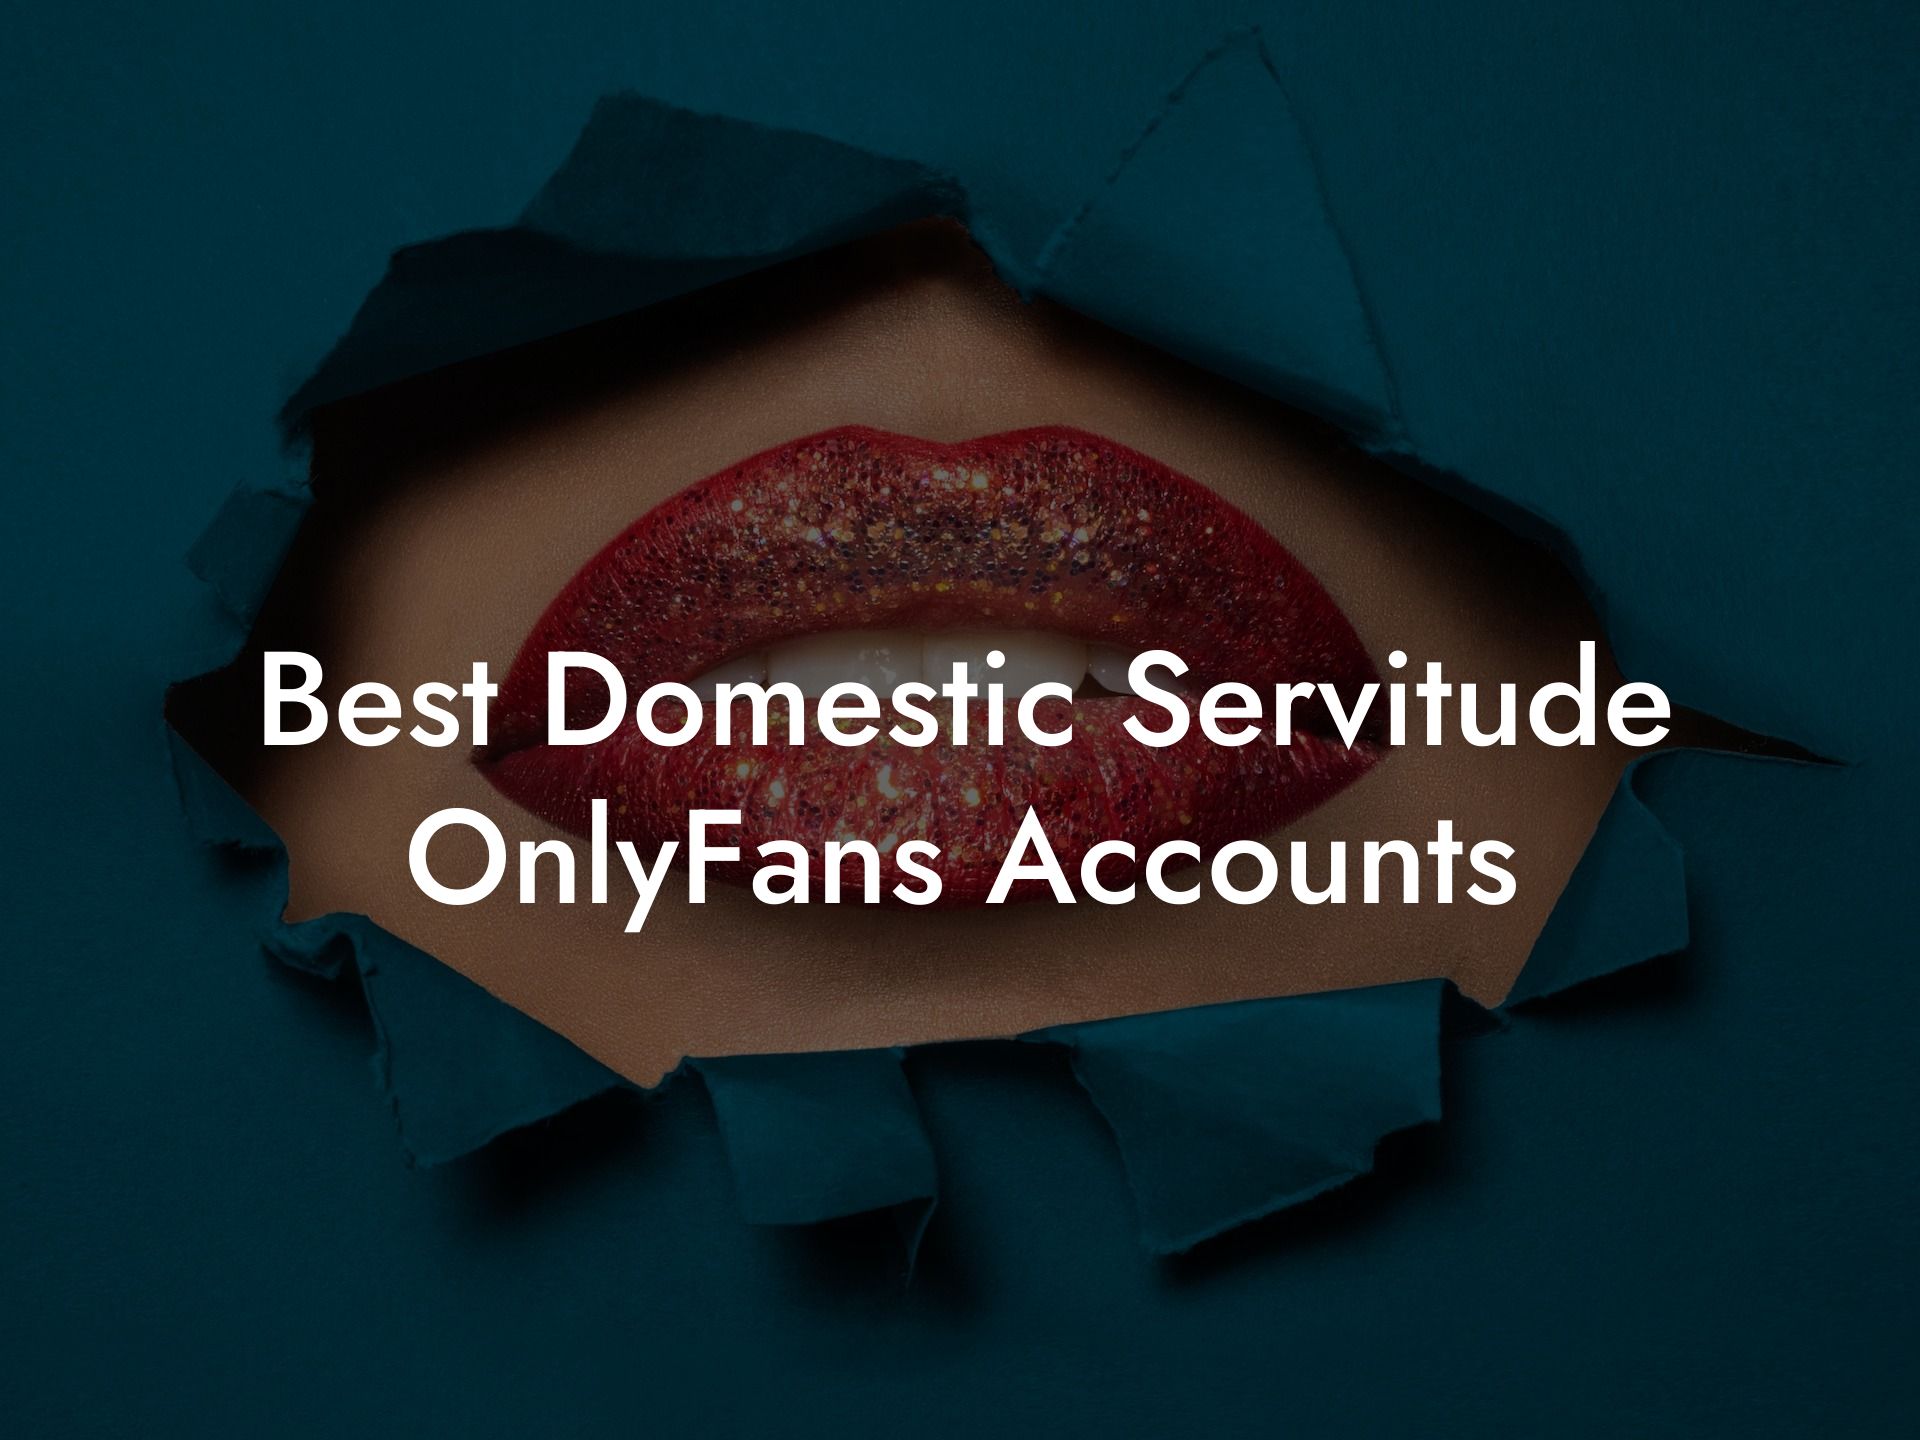 Best Domestic Servitude OnlyFans Accounts